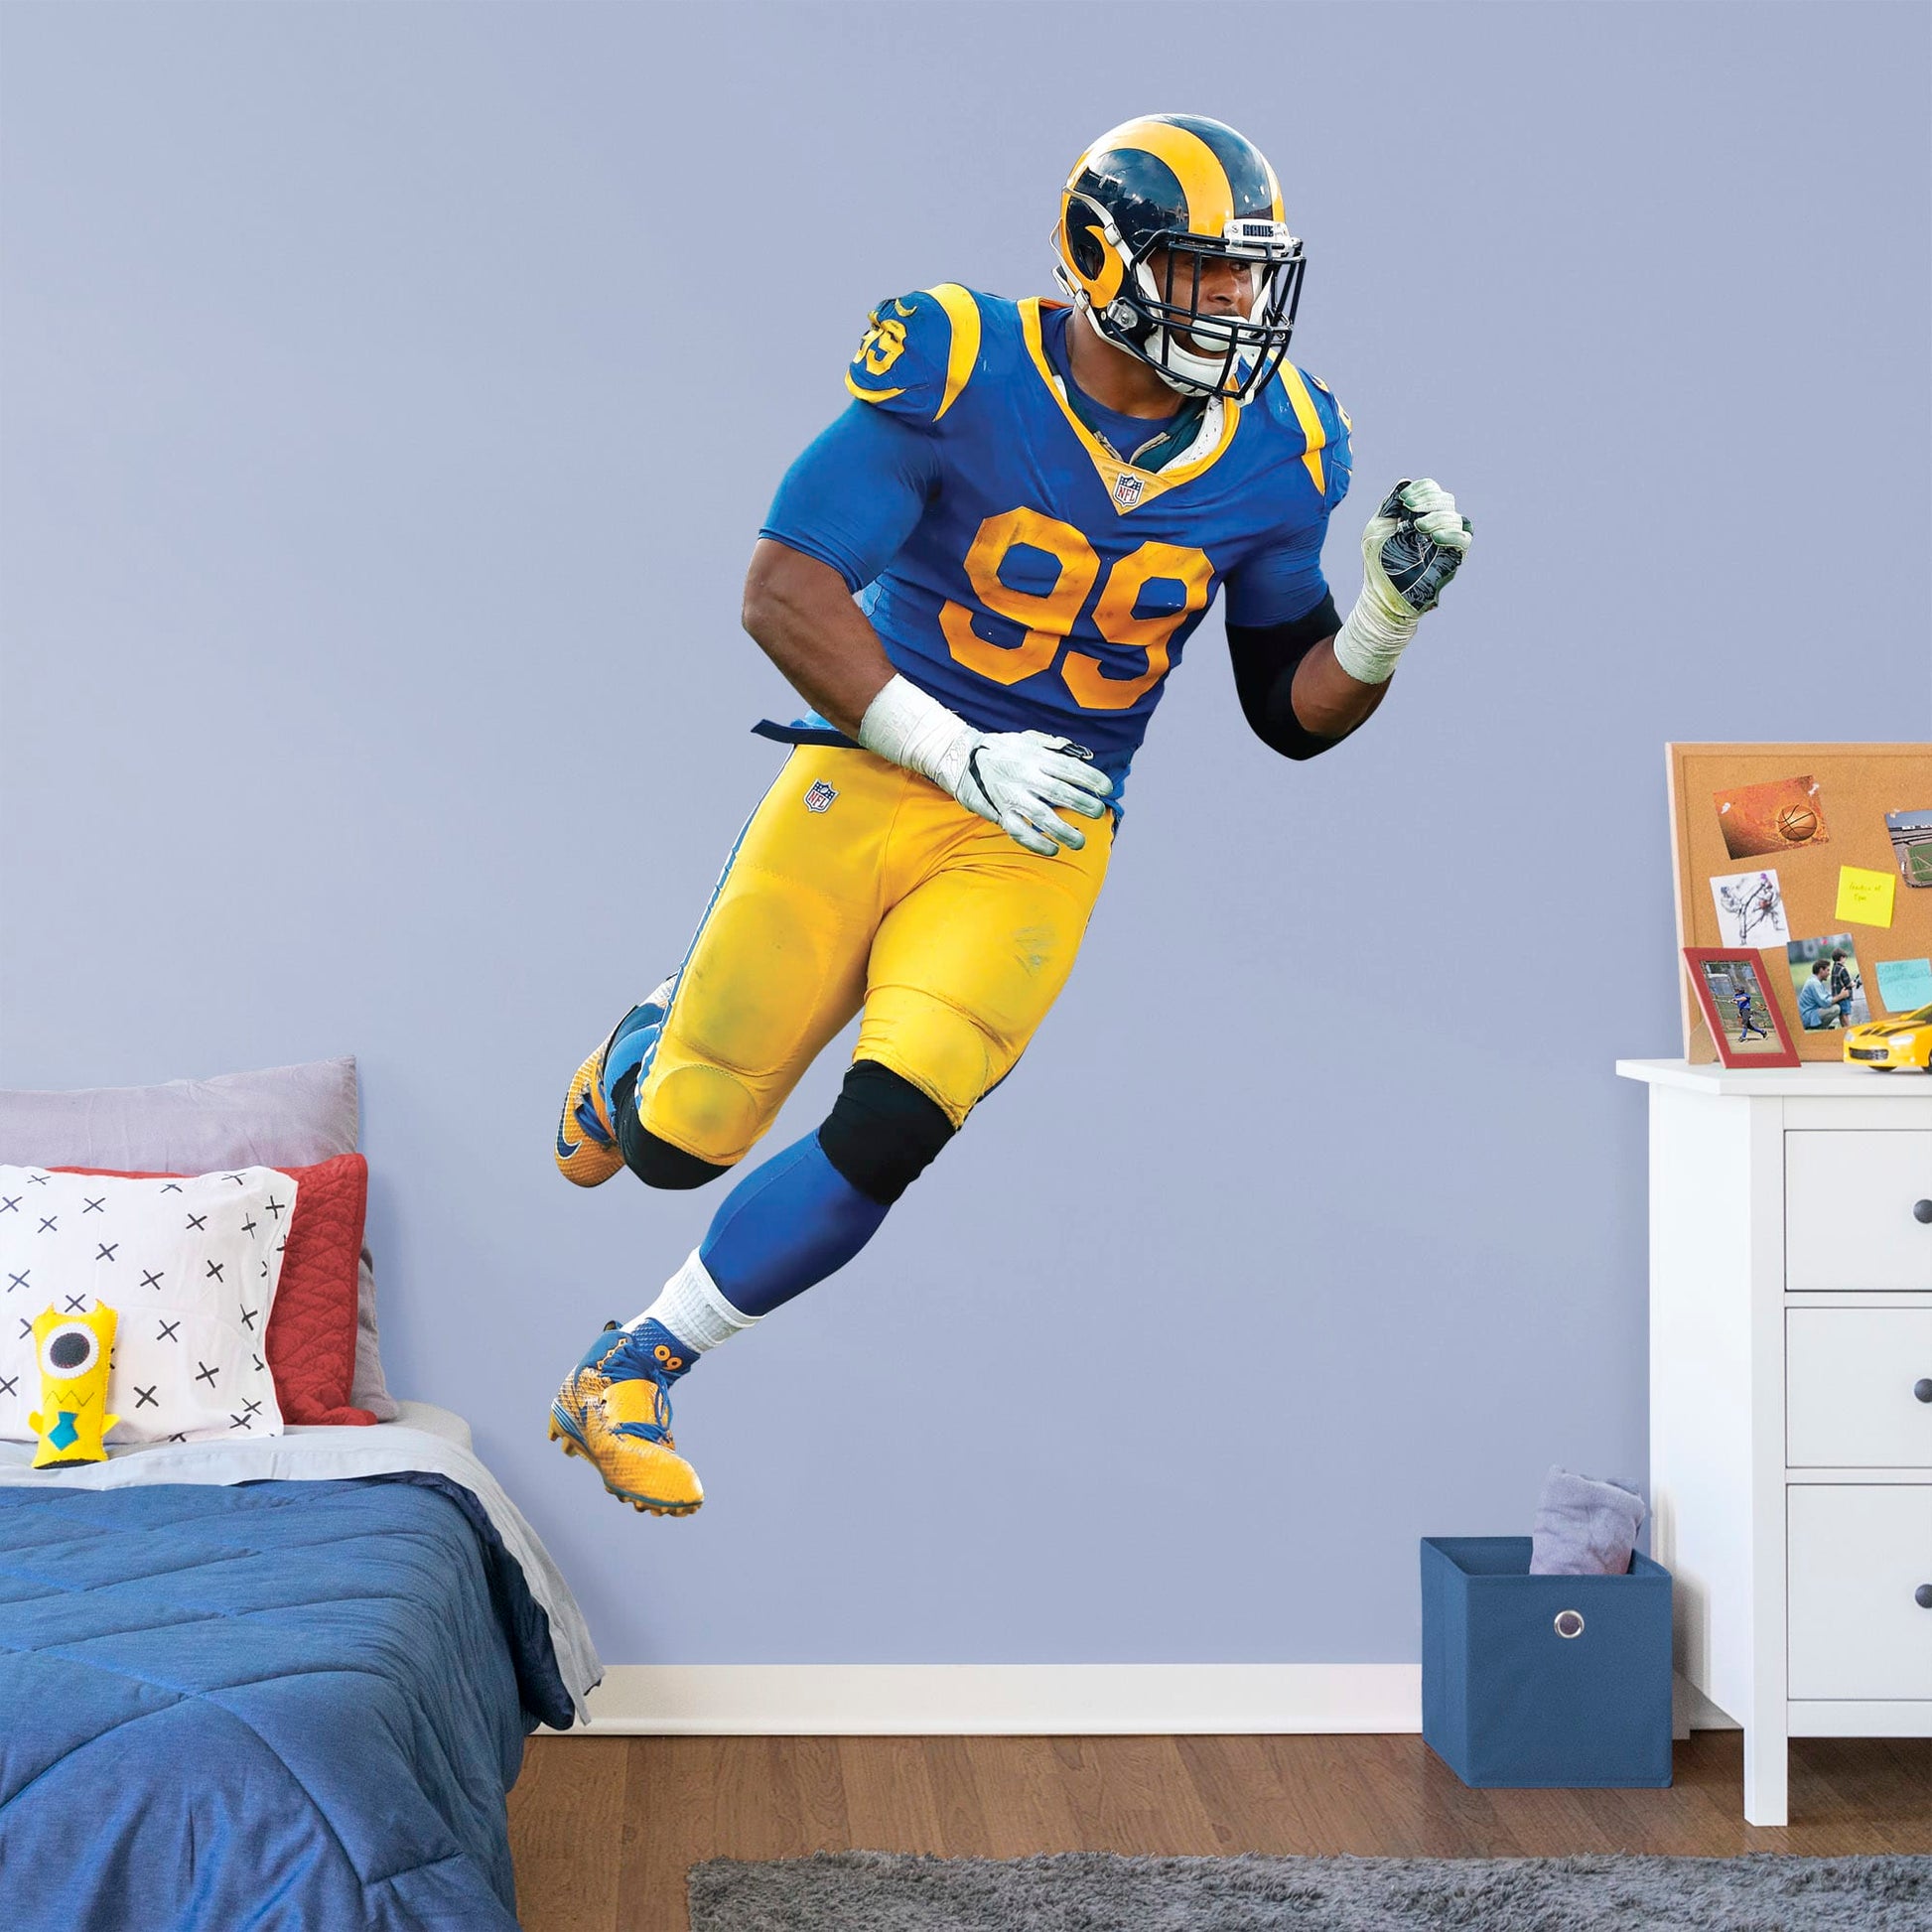 Life-Size Athlete + 2 Decals (44"W x 77"H) Ever wish you could meet Aaron Donald, one of the greatest defensive tackles in football history? Show your Los Angeles Rams team spirit with a life-size wall decal of the former Pittsburgh player once recognized as a unanimous All-American draft pick. Officially licensed by the NFL, this removable, high-quality Aaron Donald Throwback Jersey decal will show your Rams pride like no poster can.